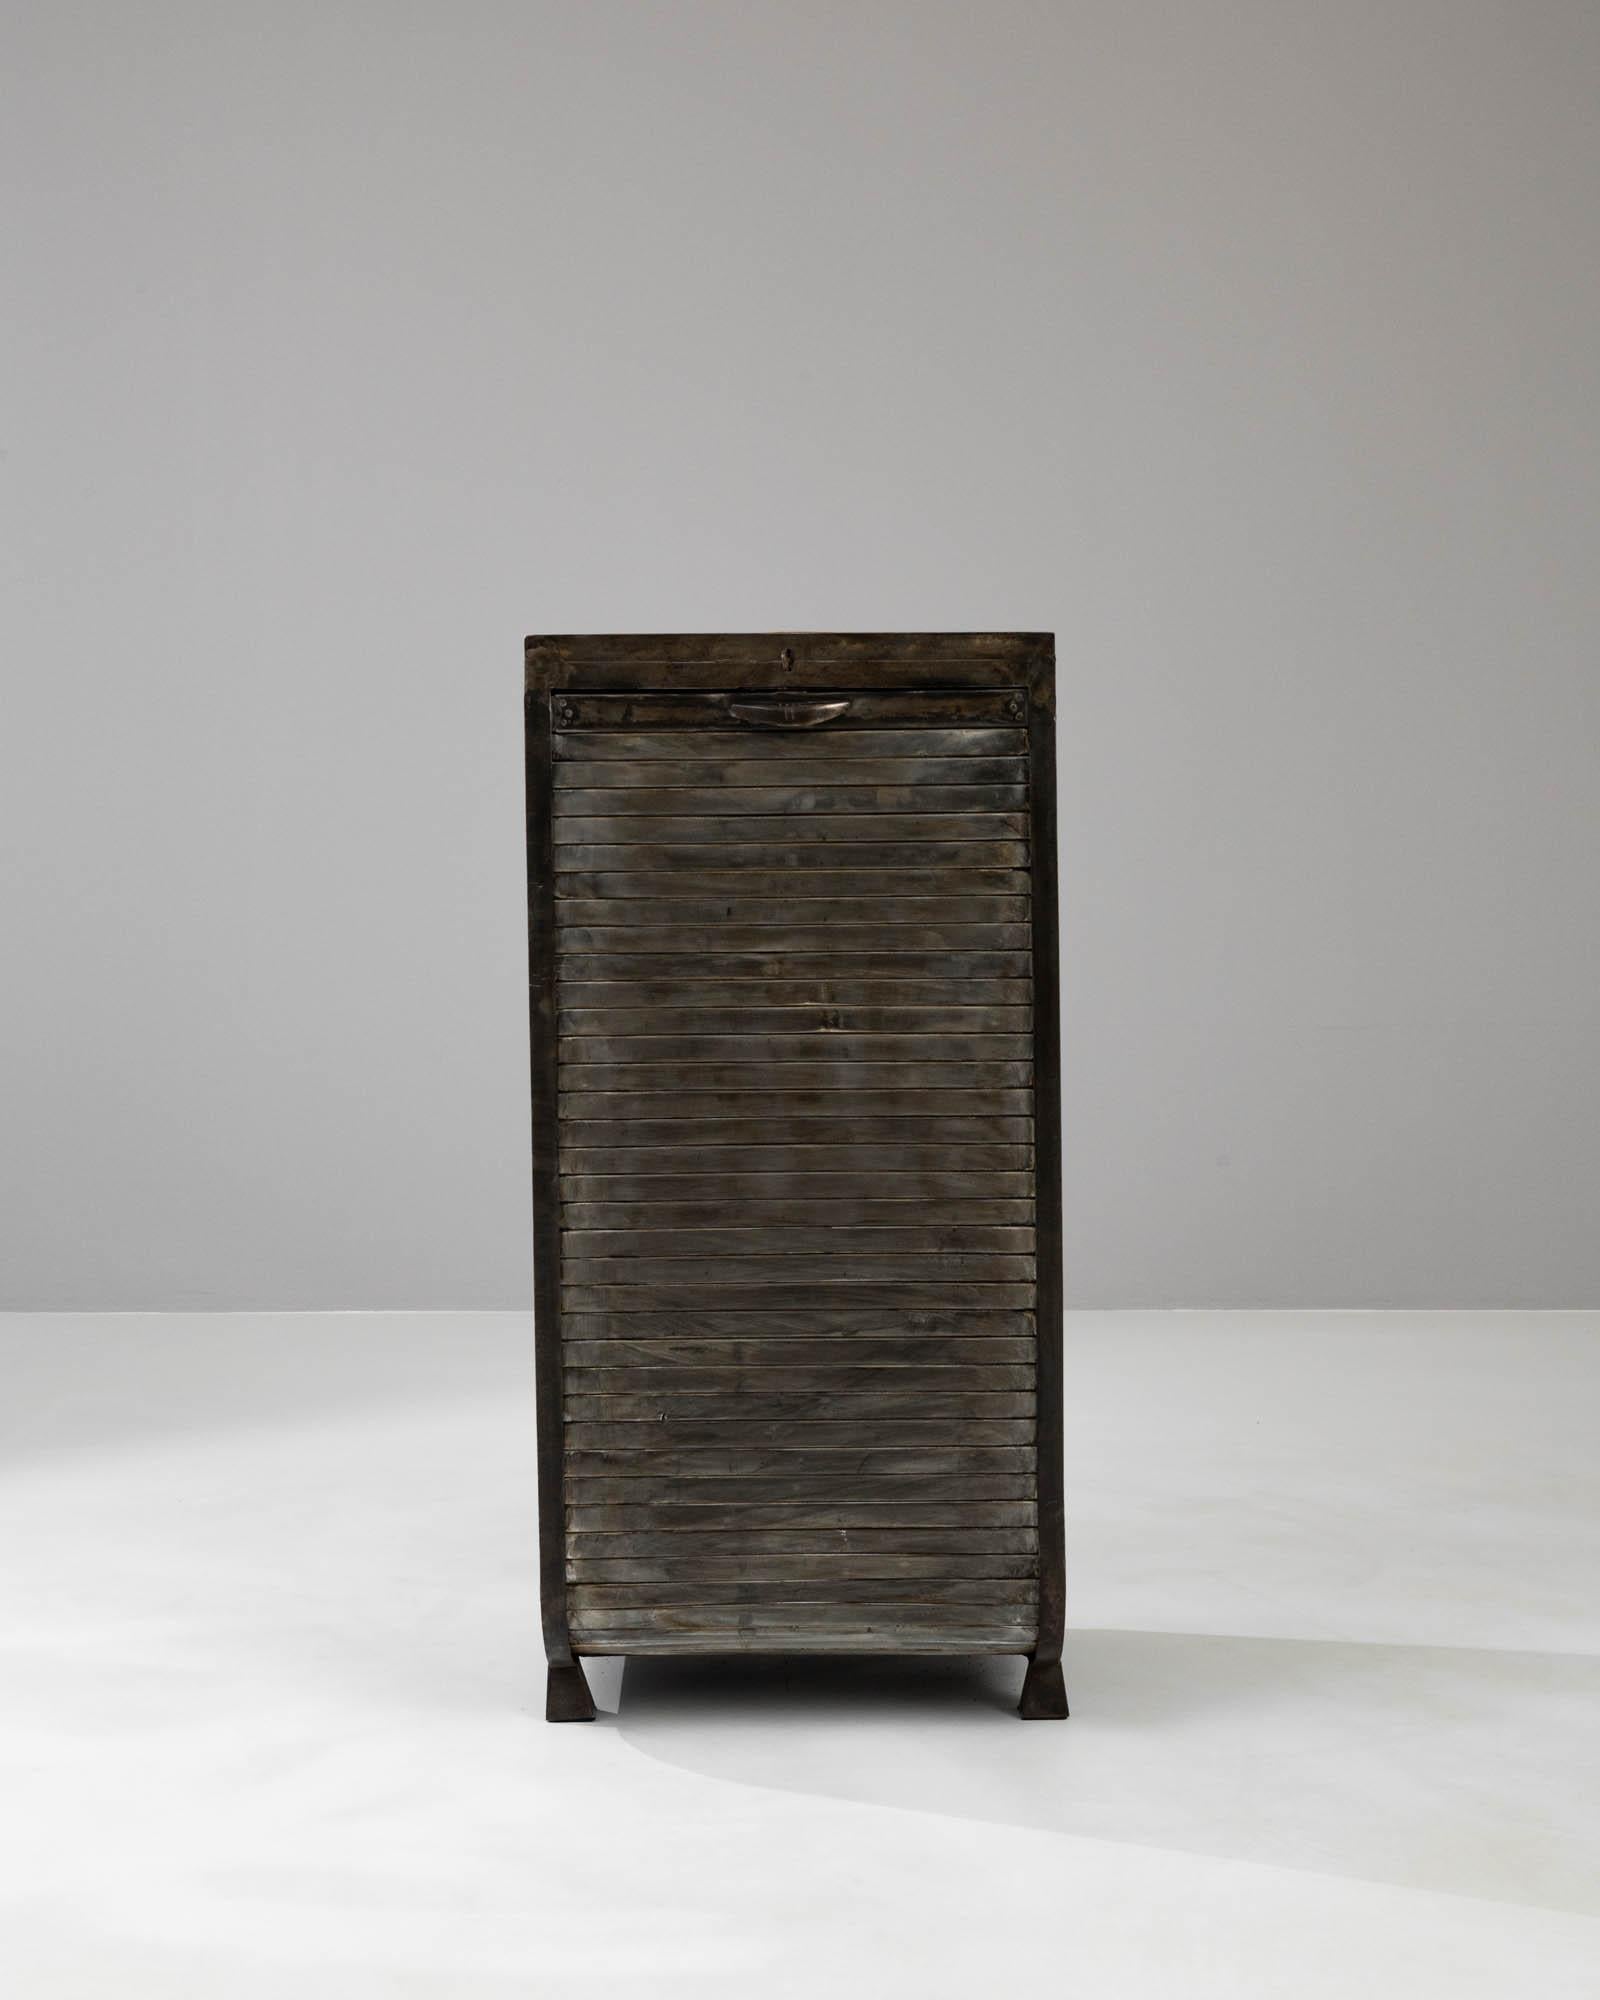 This Early 20th Century Metal Cabinet is a masterpiece of industrial design that fuses functionality with raw aesthetic appeal. Its solid metal construction stands as a testament to the era's craftsmanship, with a distinct patina that tells a rich